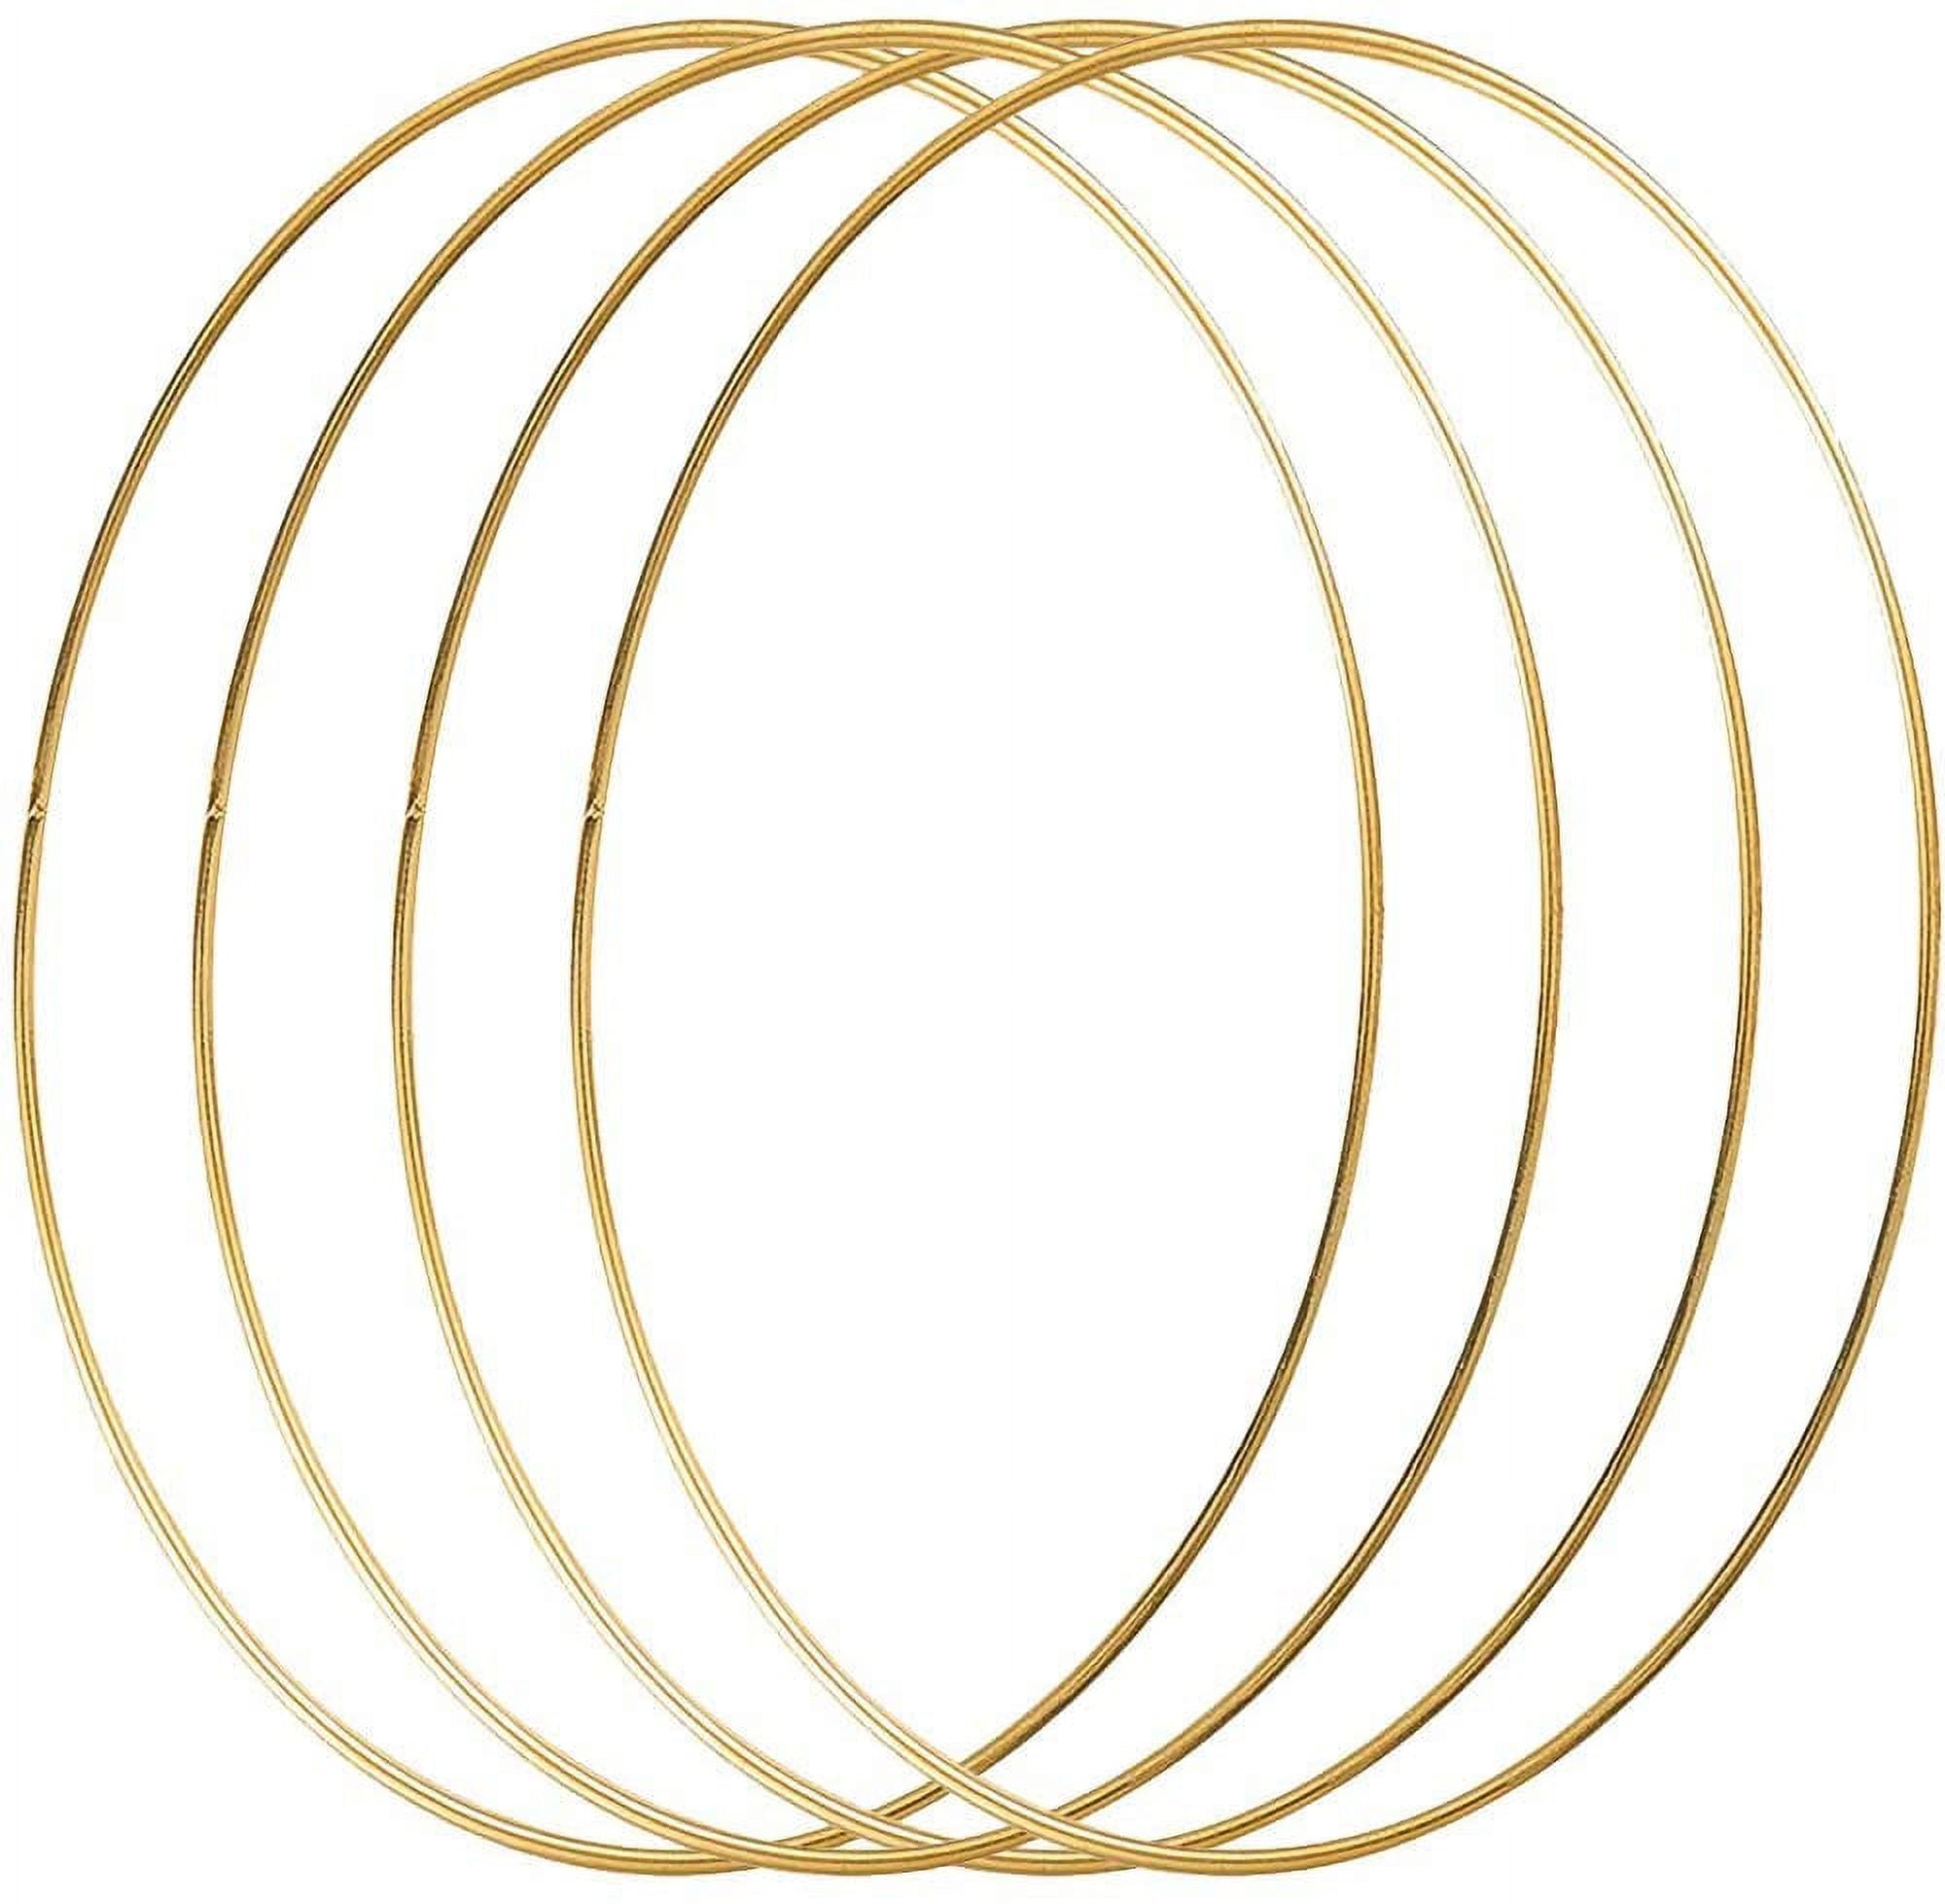  Worown 6 pcs 8, 10, 12 Inch Silver Metal Hoops for Crafts,  Floral Hoops Wreath for Making Wedding Wreath Decor and Wall Hanging Craft  : Arts, Crafts & Sewing